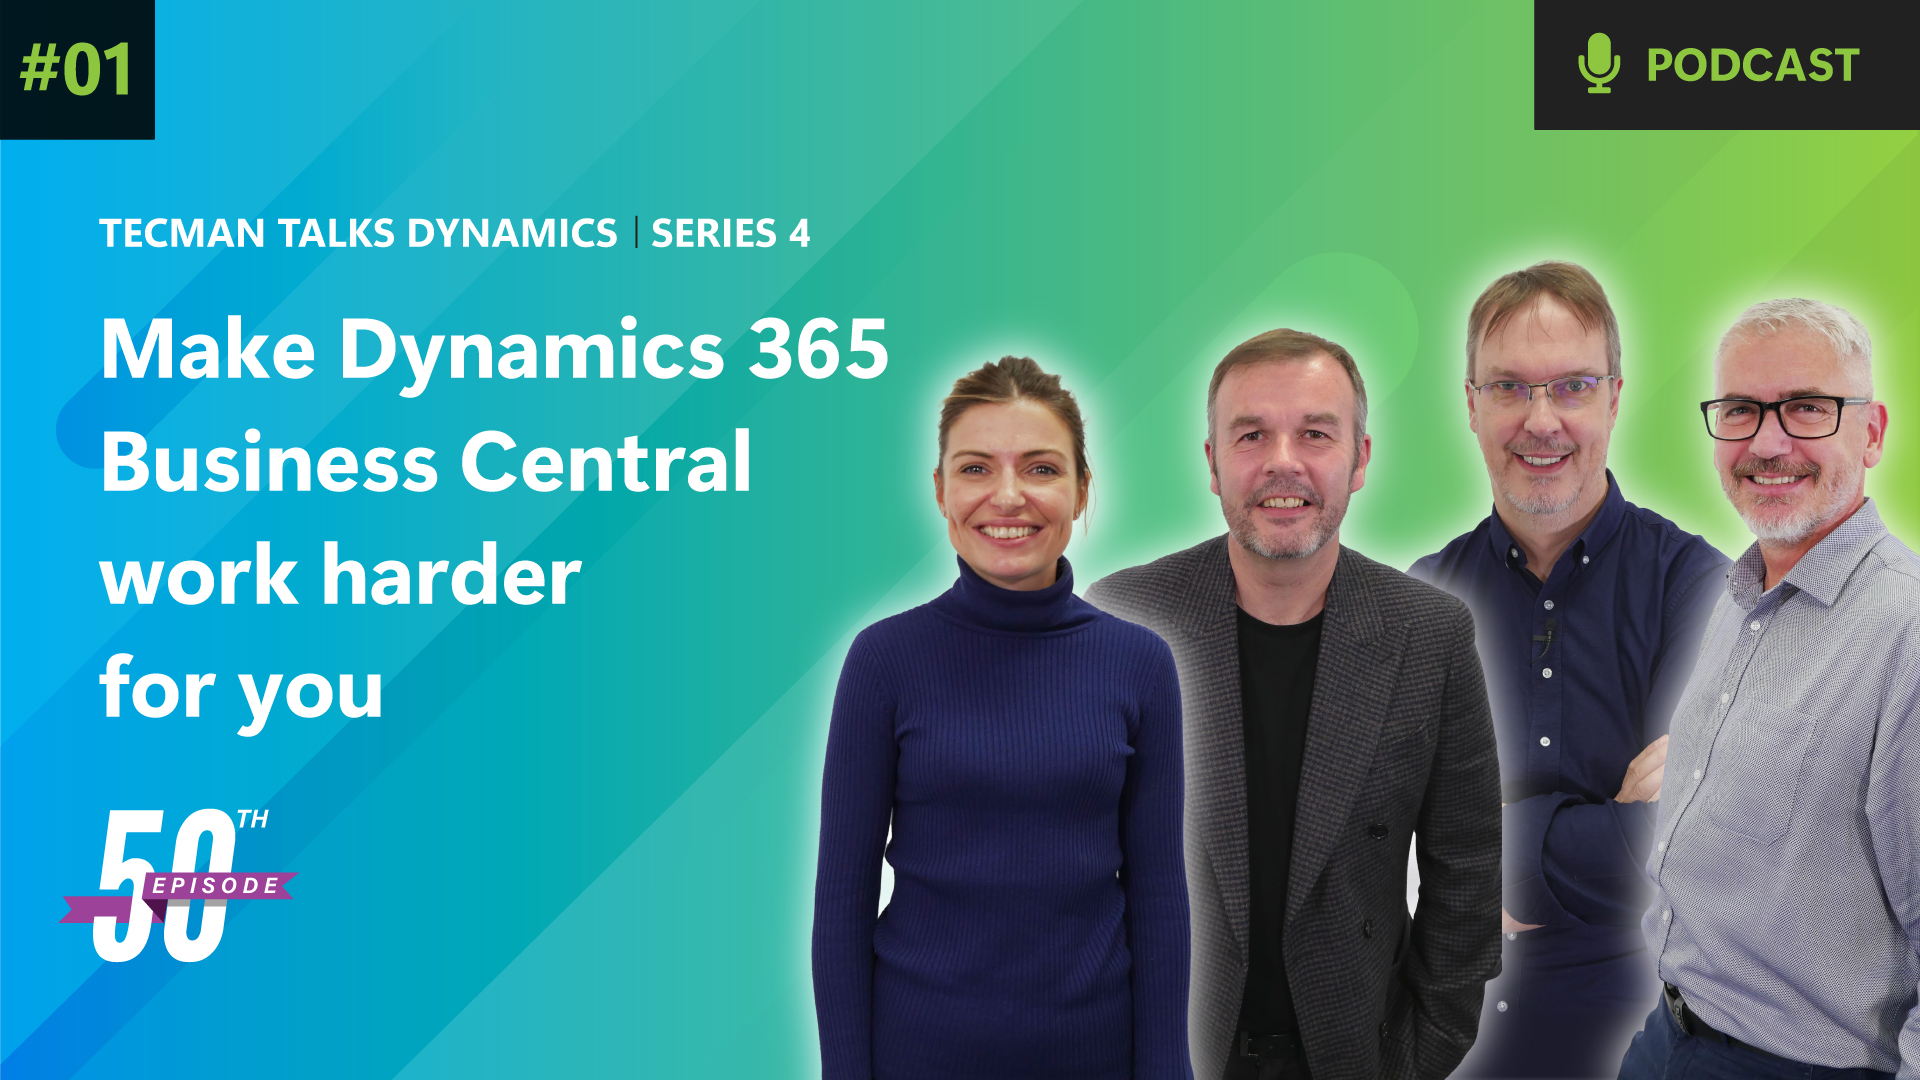 Make Microsoft Dynamics 365 Business Central work harder for you with the 3 Rs - review, refresh, and revisit!